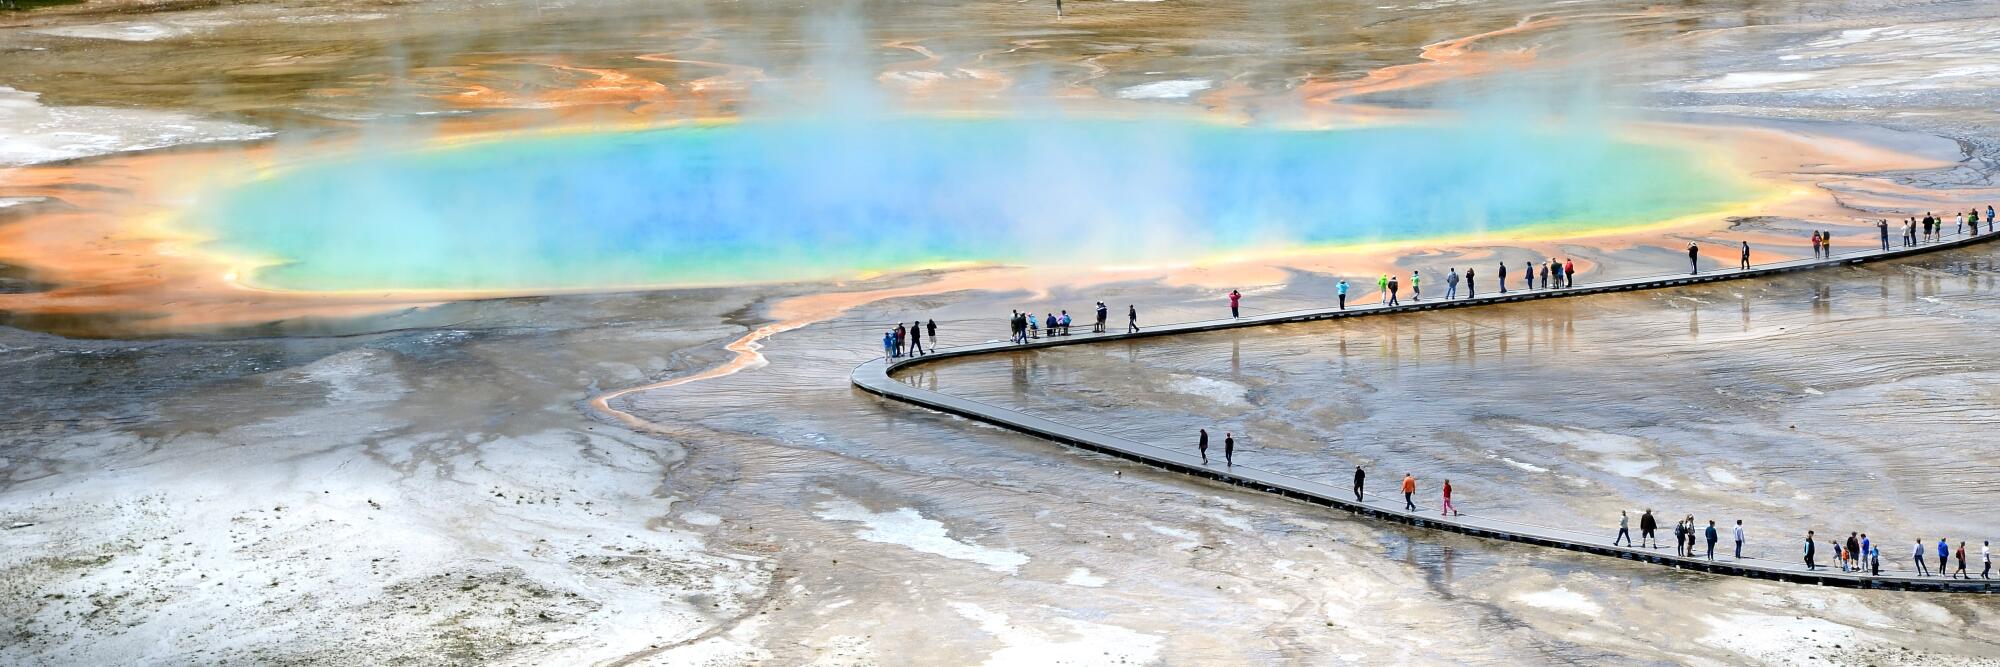 Hikers file past a spring of rainbow hues. Grand Prismatic Spring, Yellowstone National Park, Wyo. 